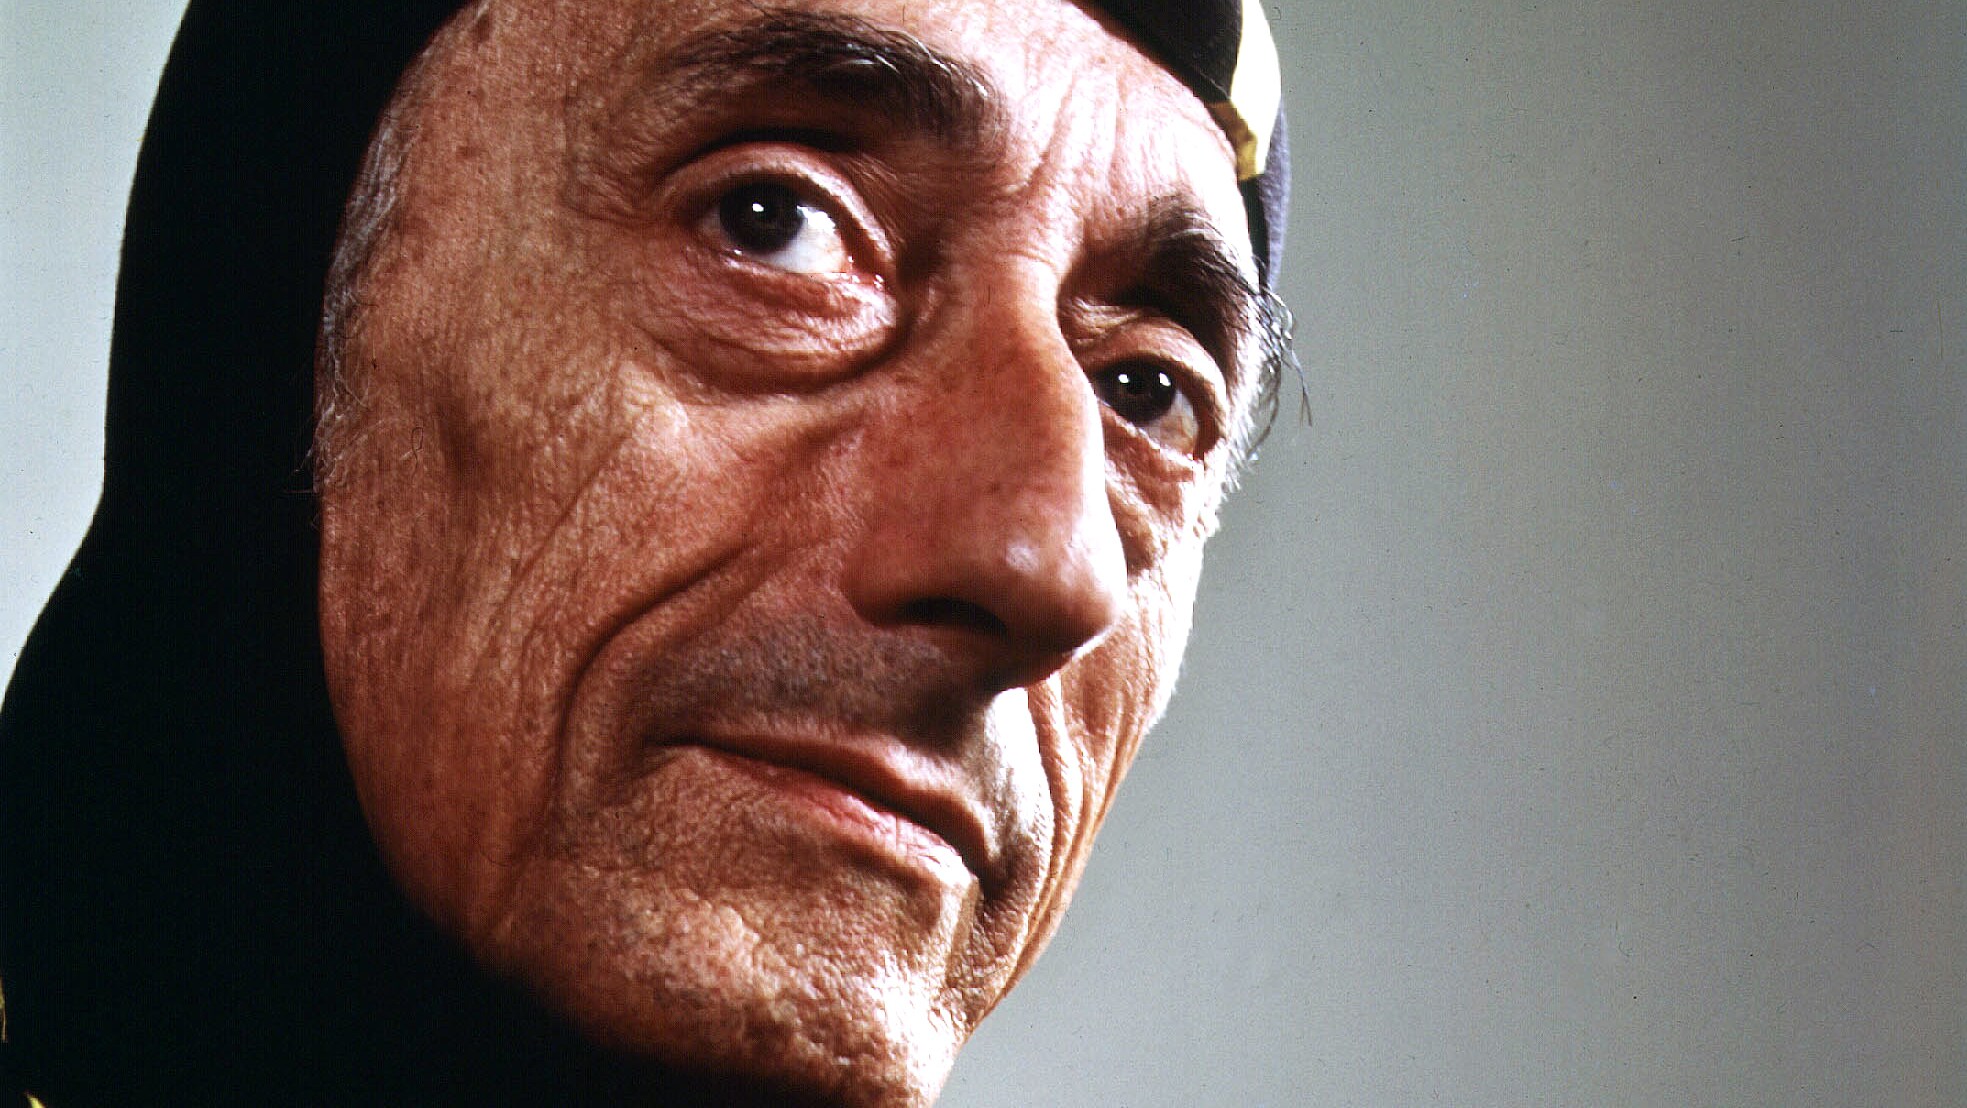 Jacques Cousteau in a diving suit, 1972. (Credit: Yousuf Karsh)